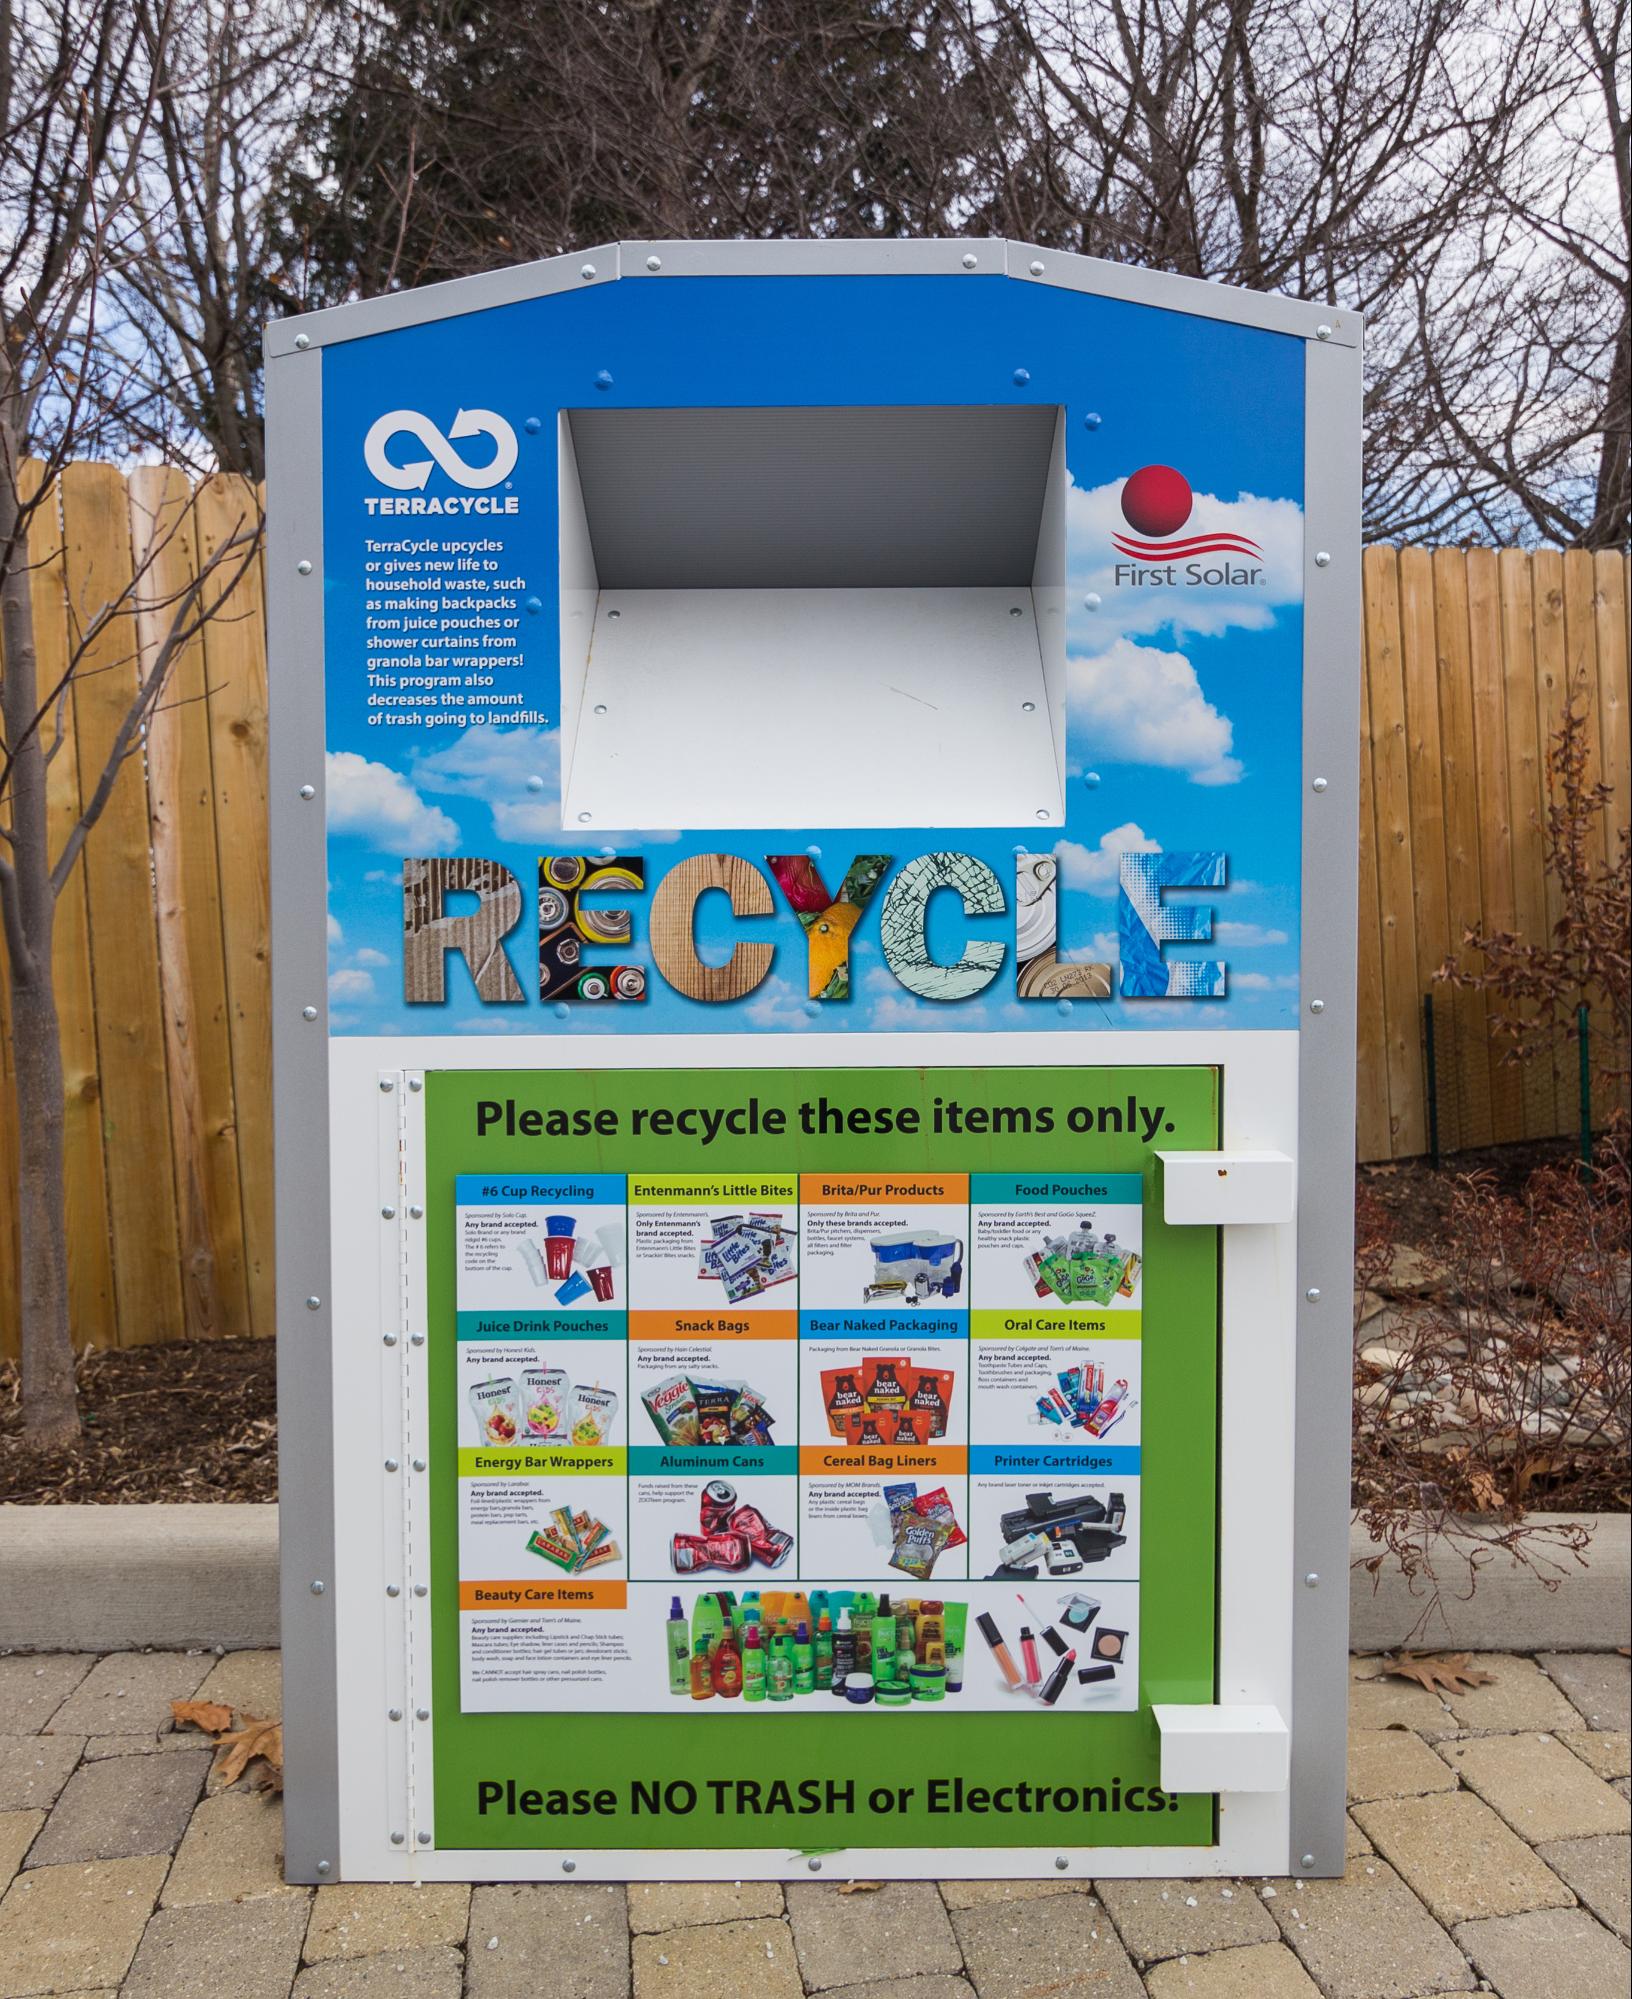 Recycling with TerraCycle